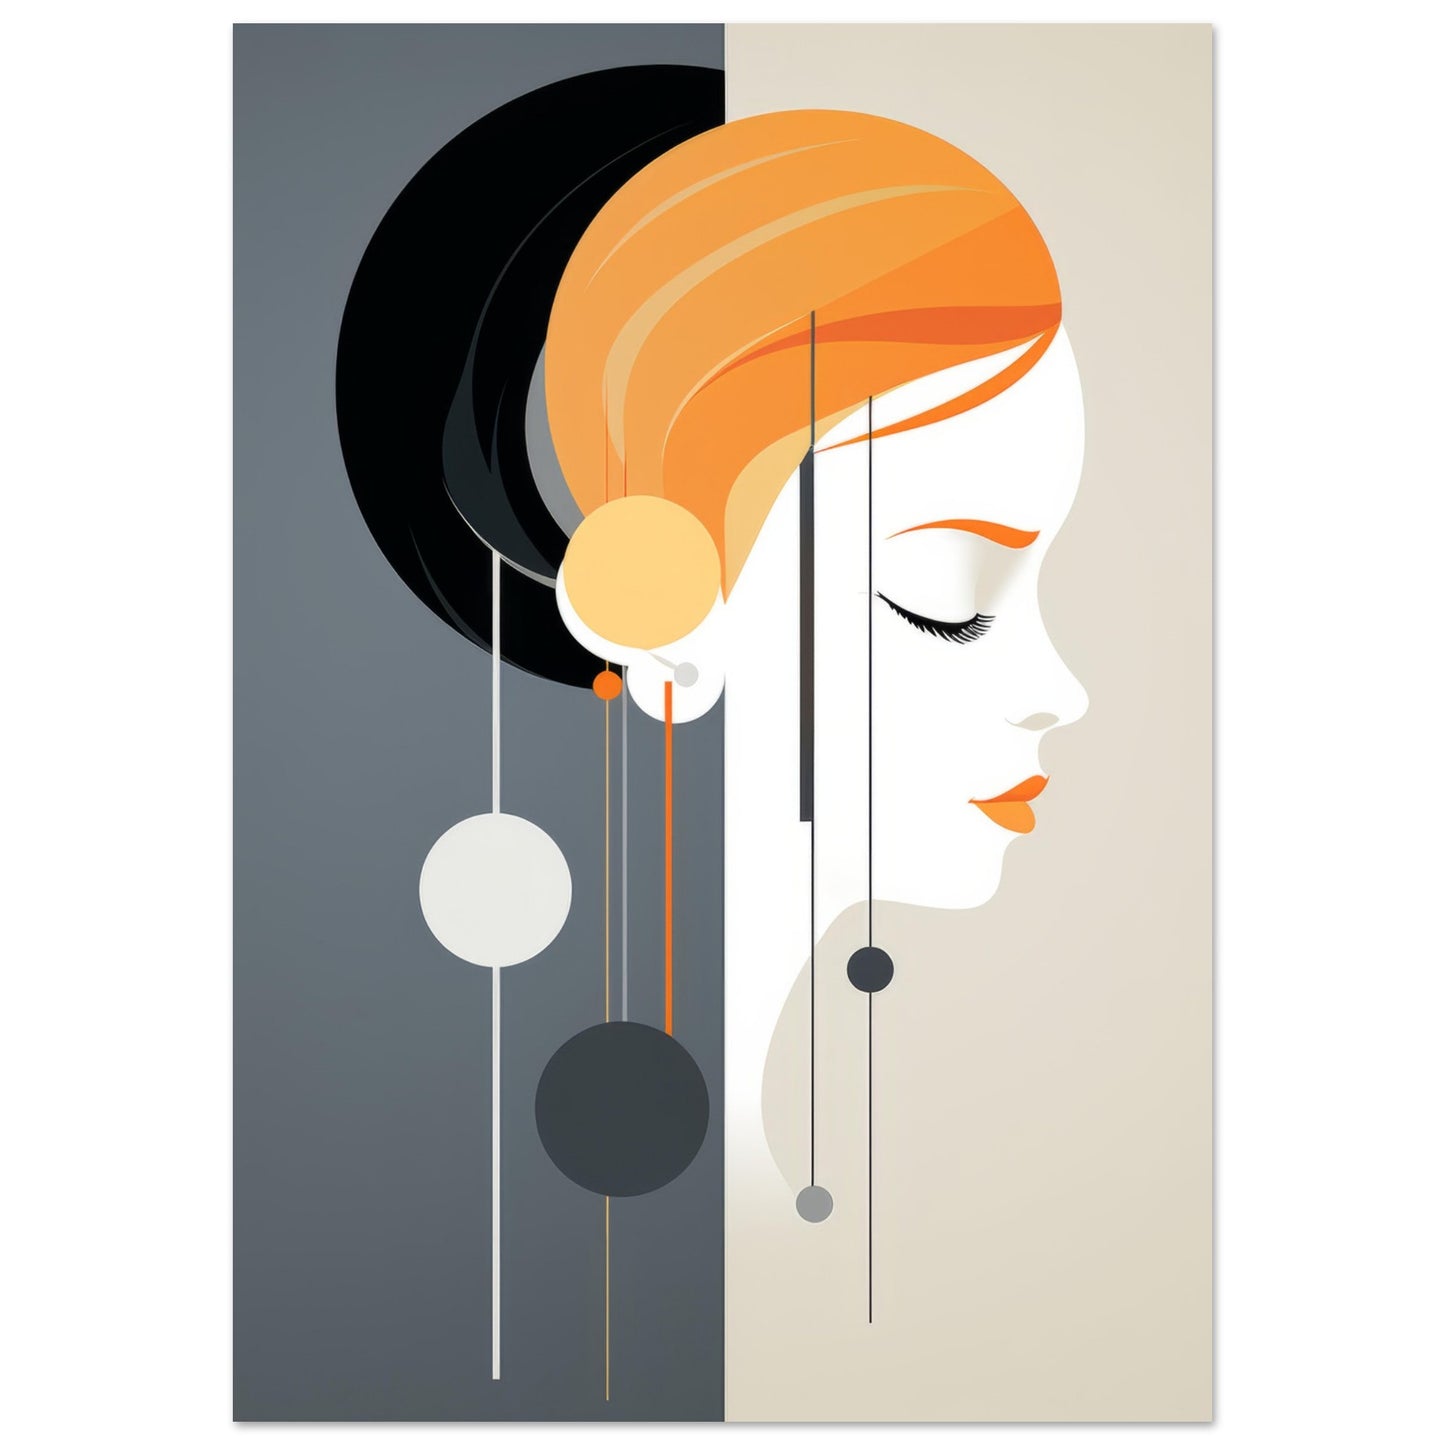 Minimalist modern art print featuring an elegant female face in profile, surrounded by cascading geometric shapes, titled "Heavy Legacy".